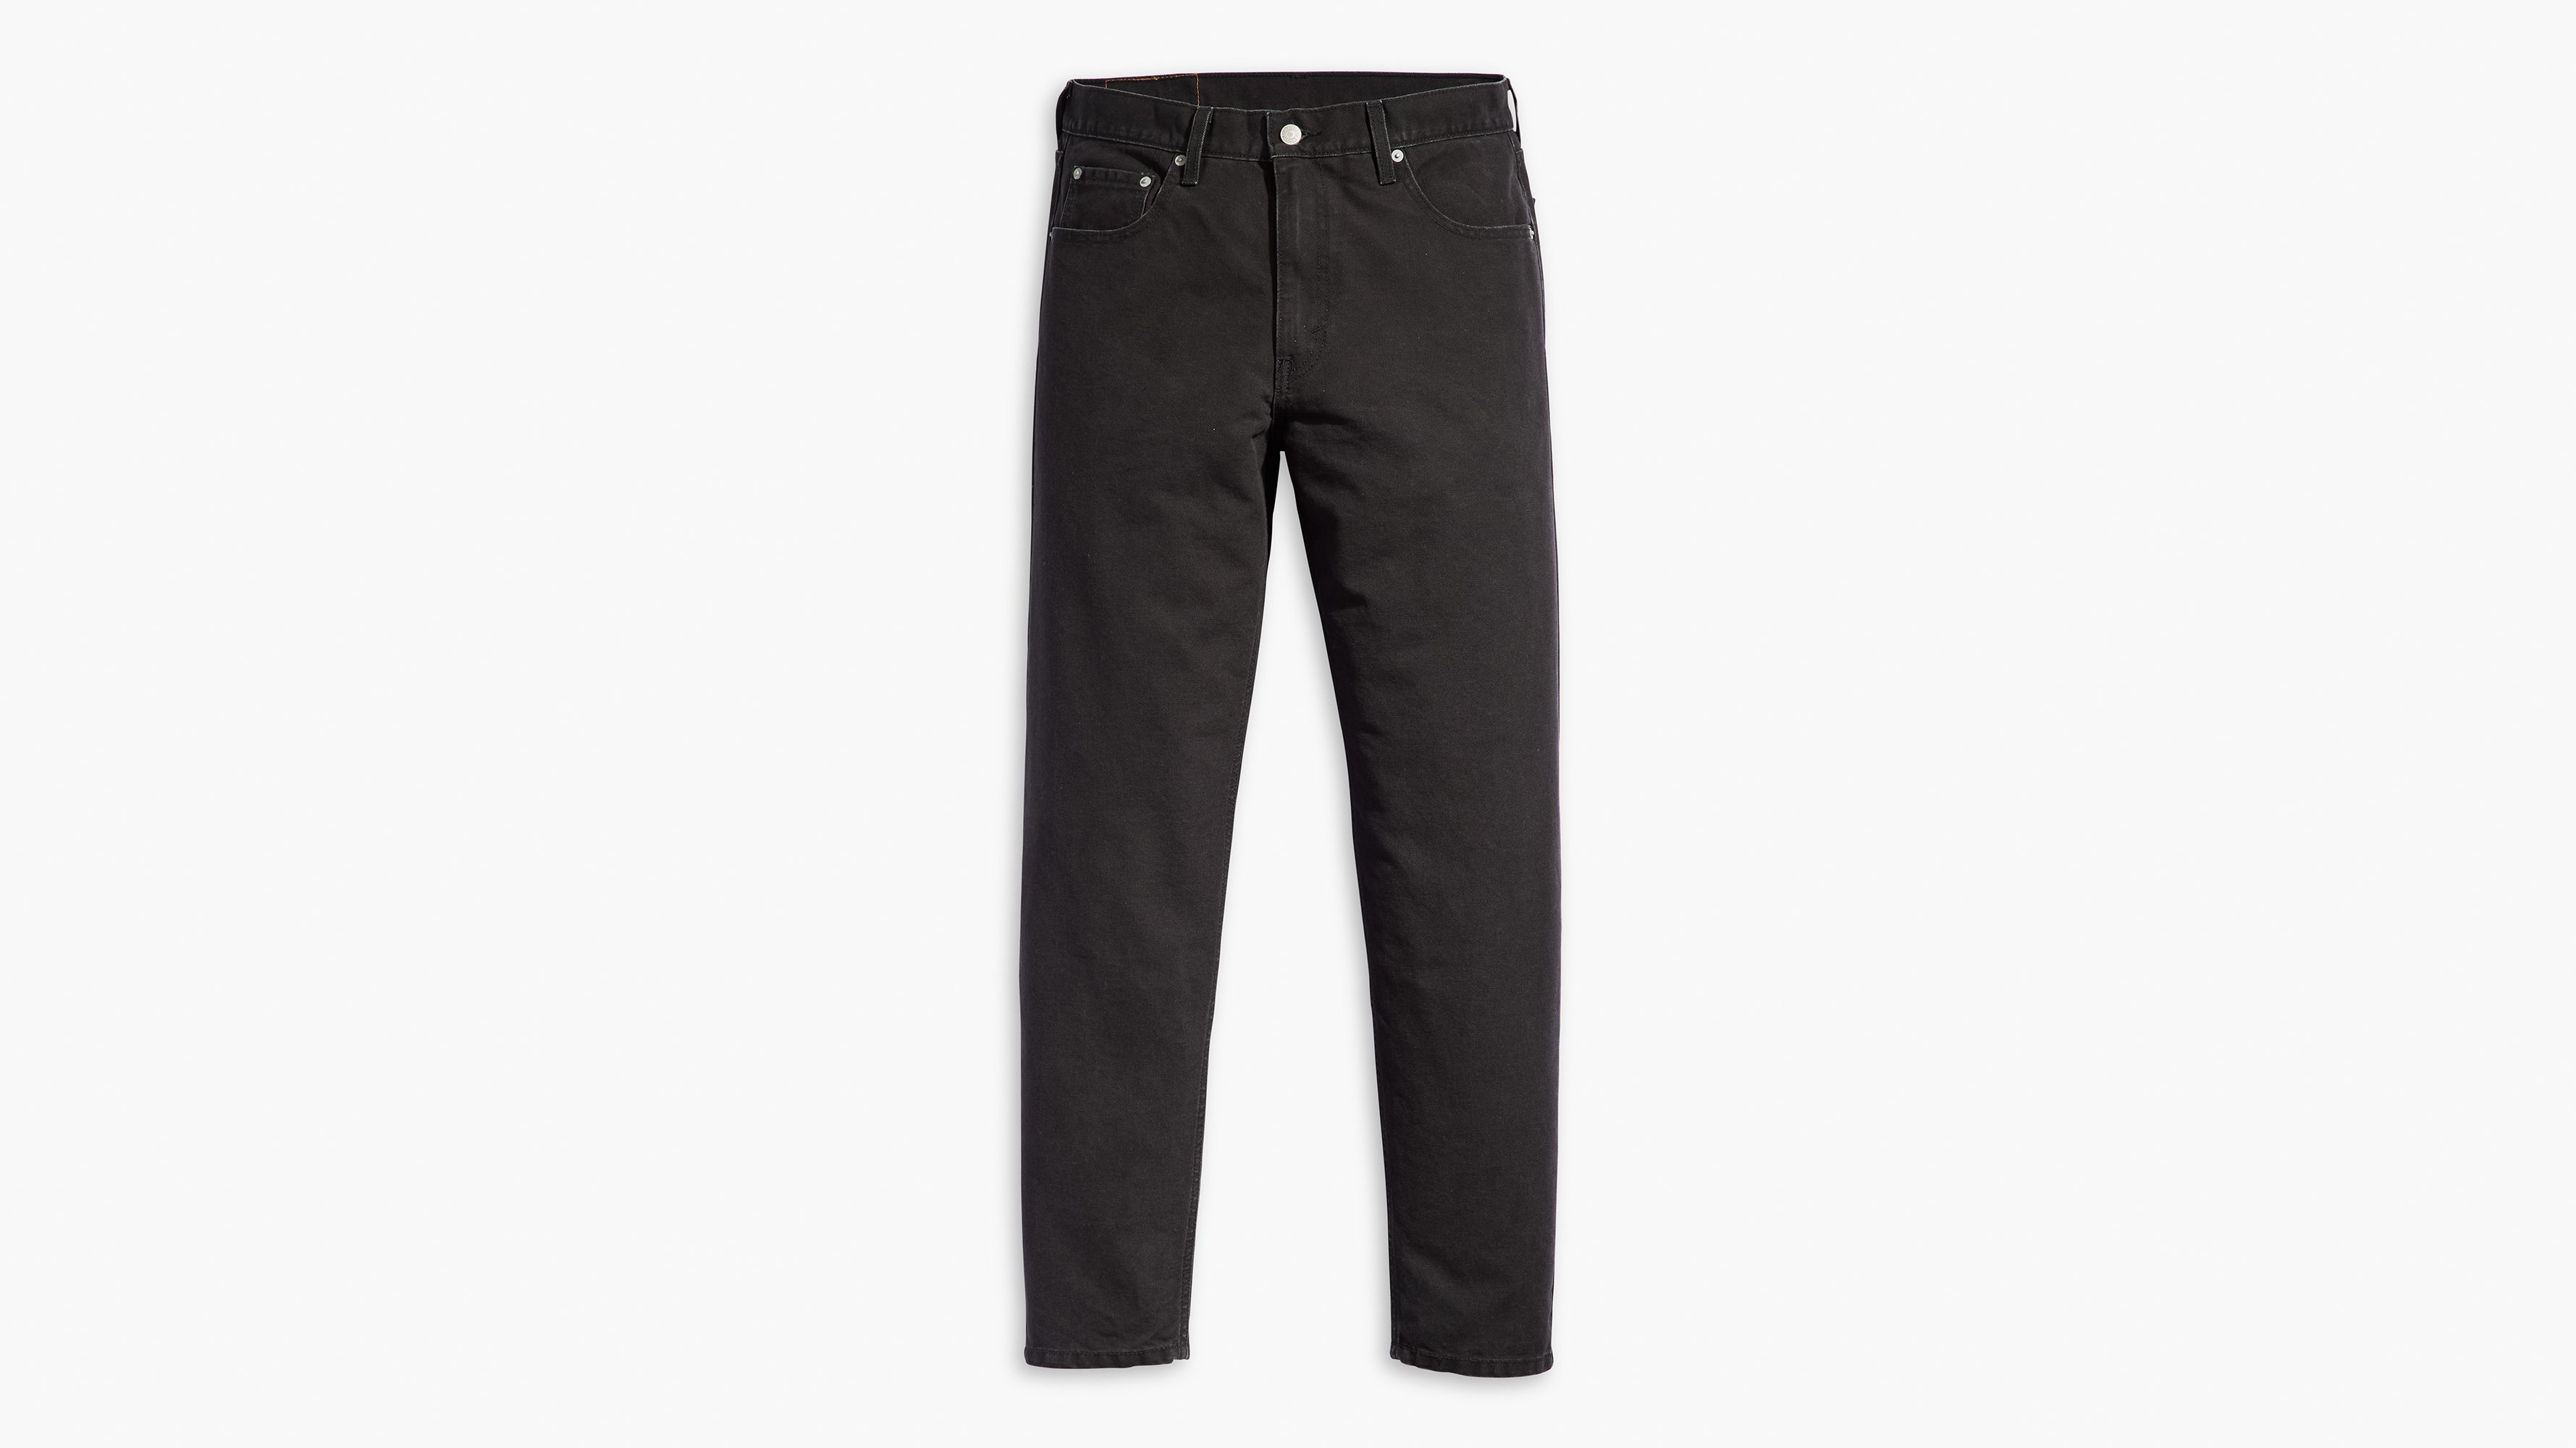 550™ '92 Relaxed Taper Fit Men's Jeans - Black | Levi's® US